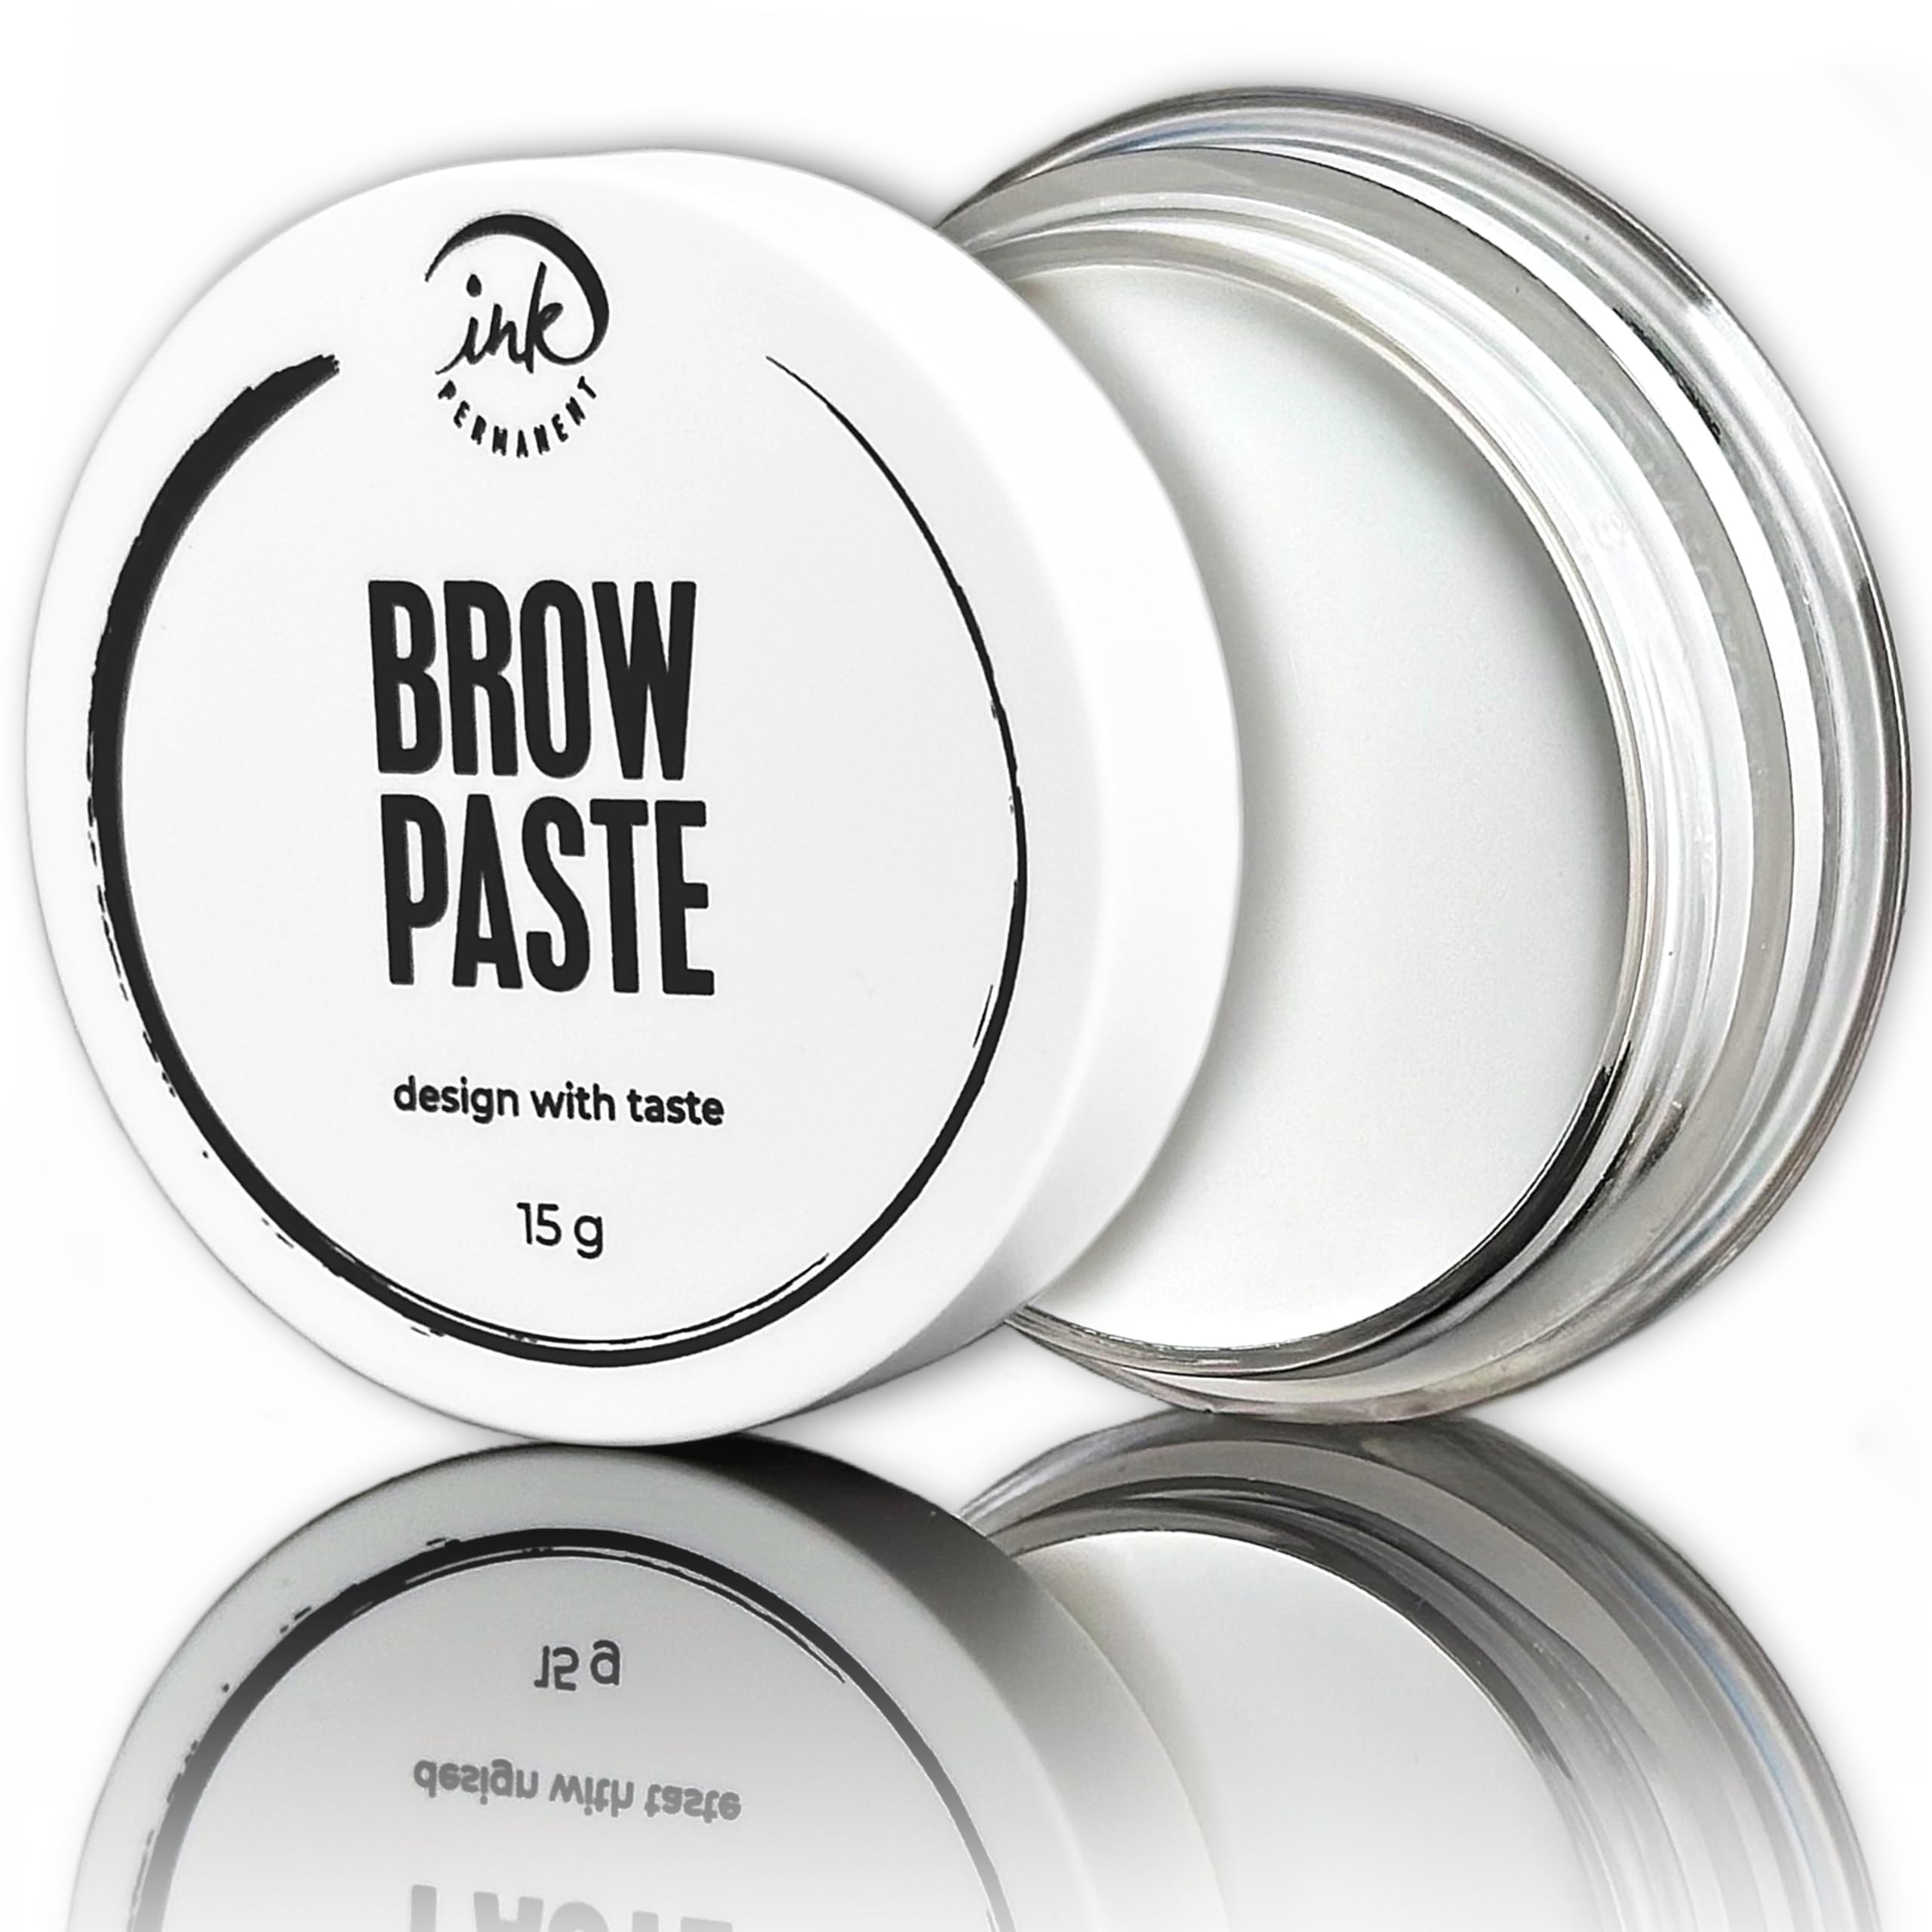 Eyebrow White Mapping Brow Paste [Large 15g Bottle] EyeBrow Mapping Paste, Brow Contour Paste for Microblading Supplies, PMU Supplies, Eyebrows design, draw or sketch the shape